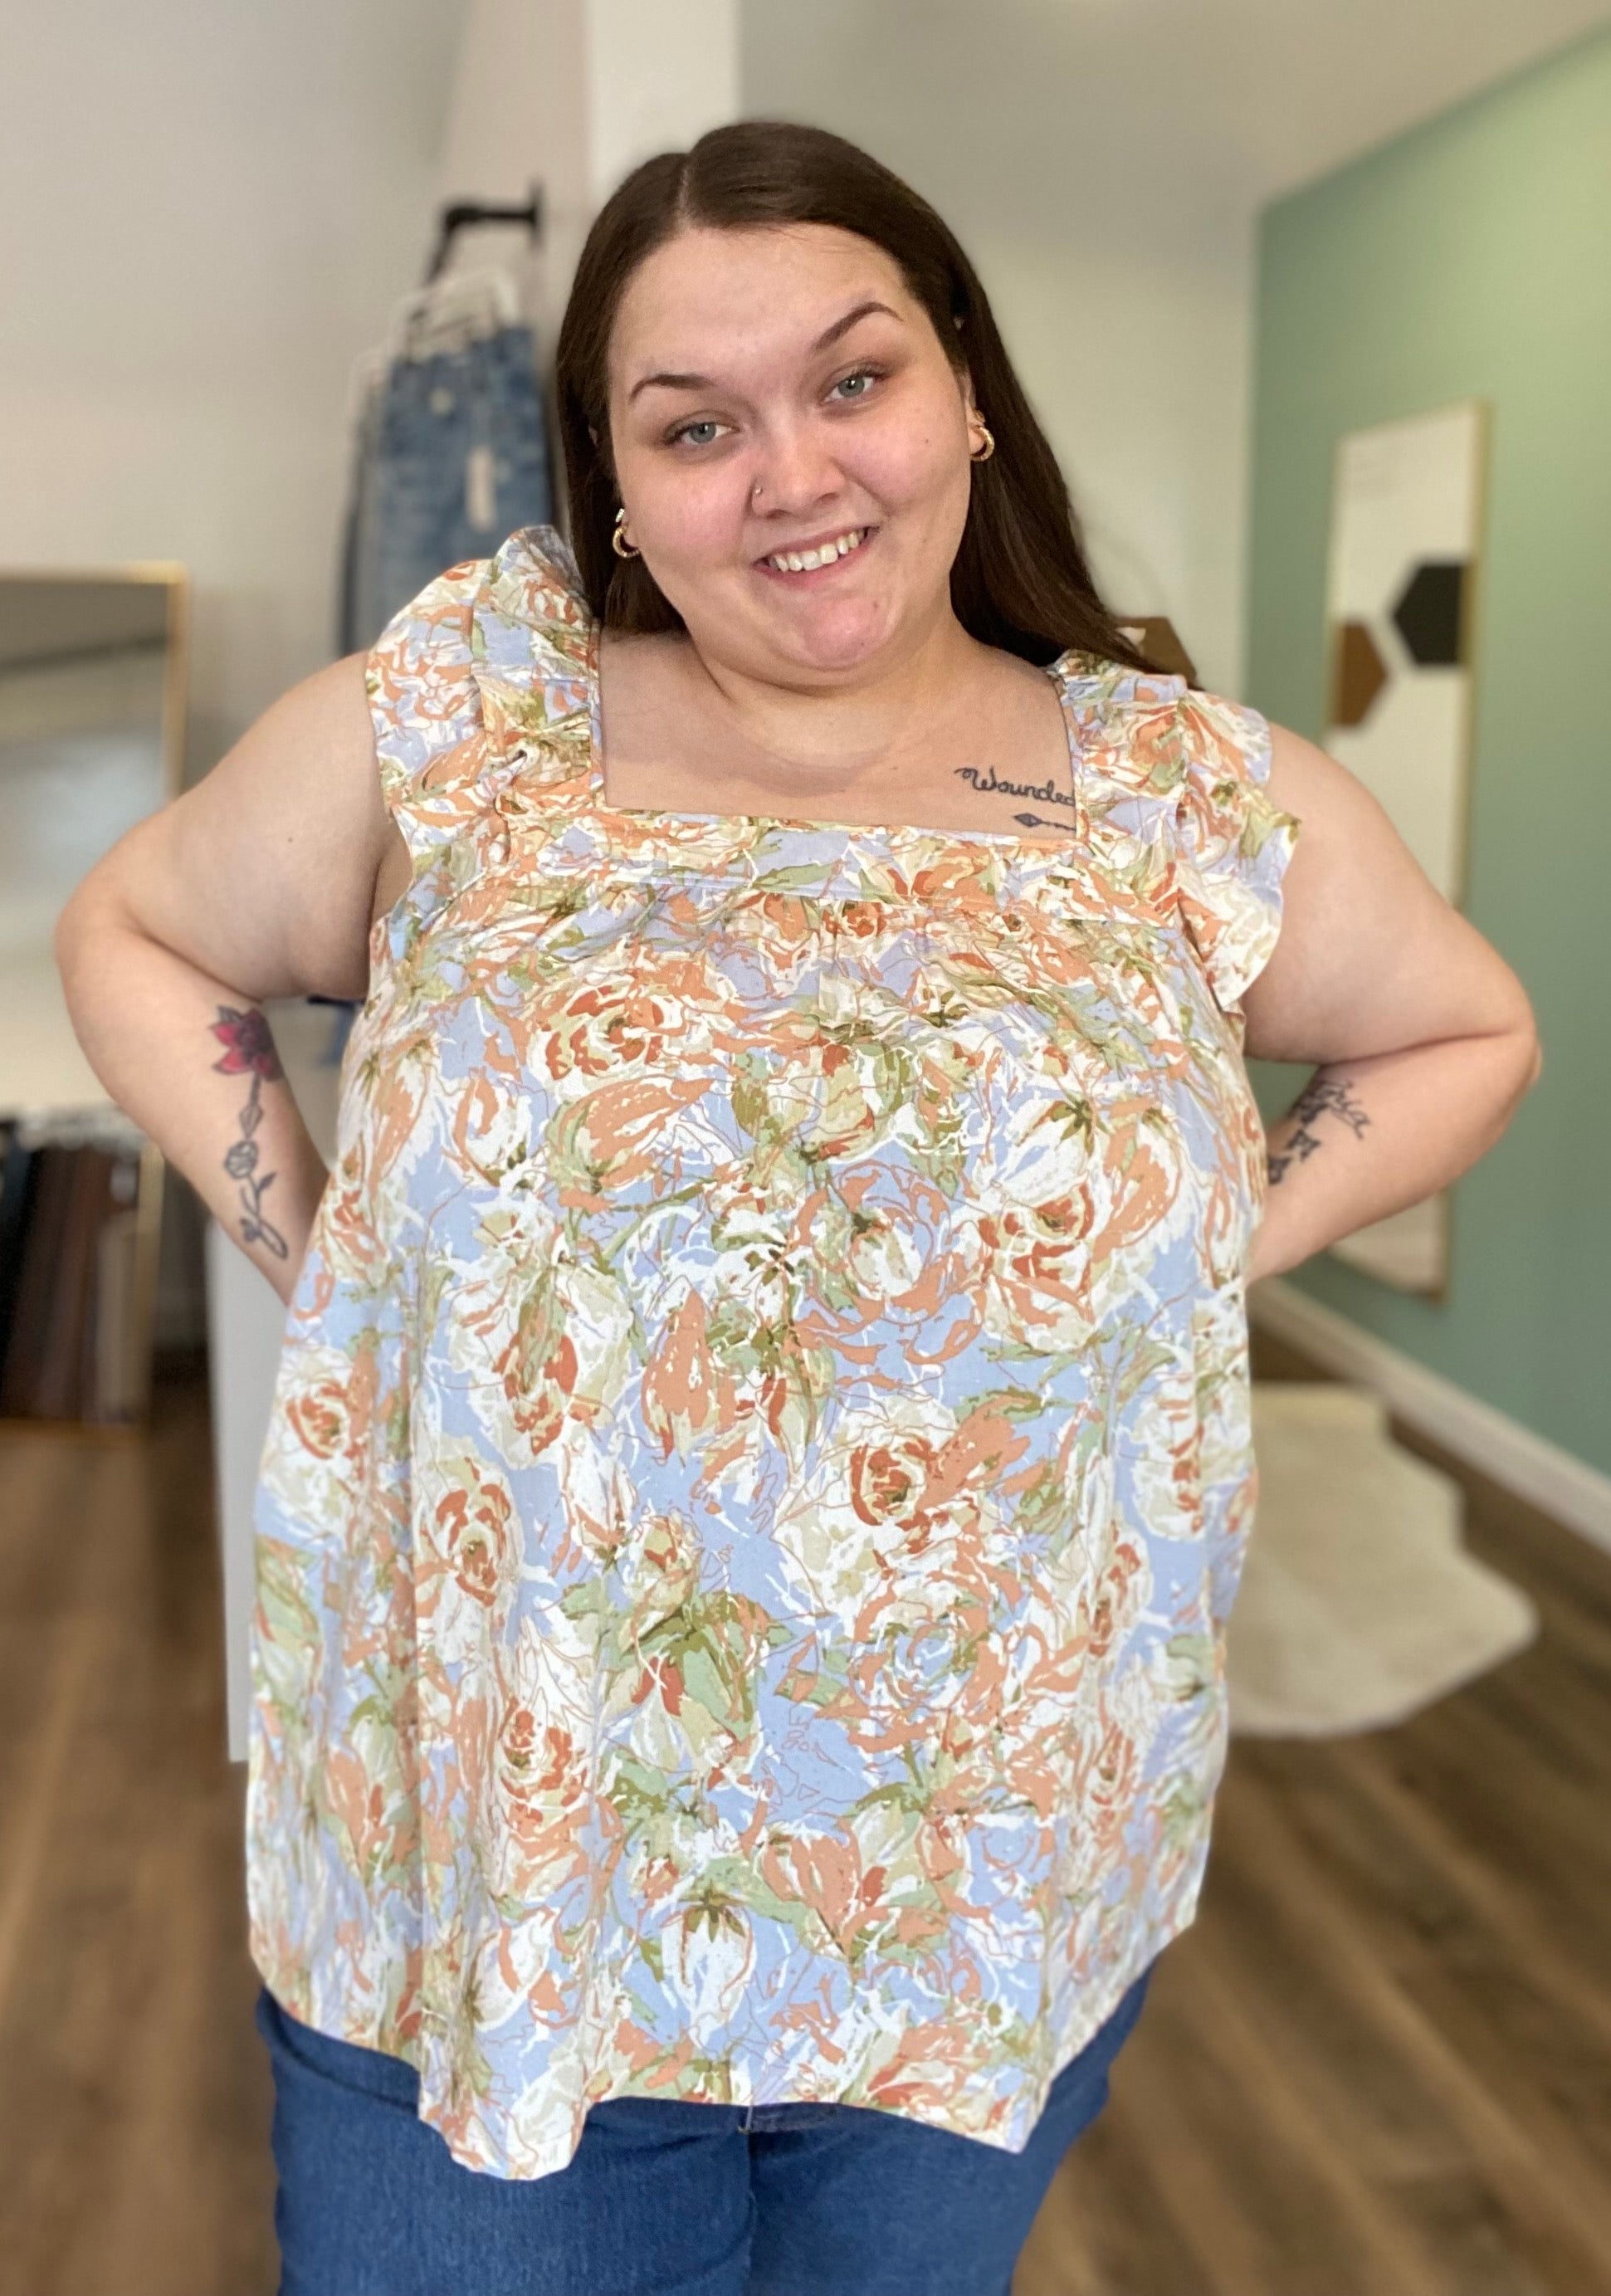 Shop Allora Floral Sleeveless Blouse-Blouse at Ruby Joy Boutique, a Women's Clothing Store in Pickerington, Ohio